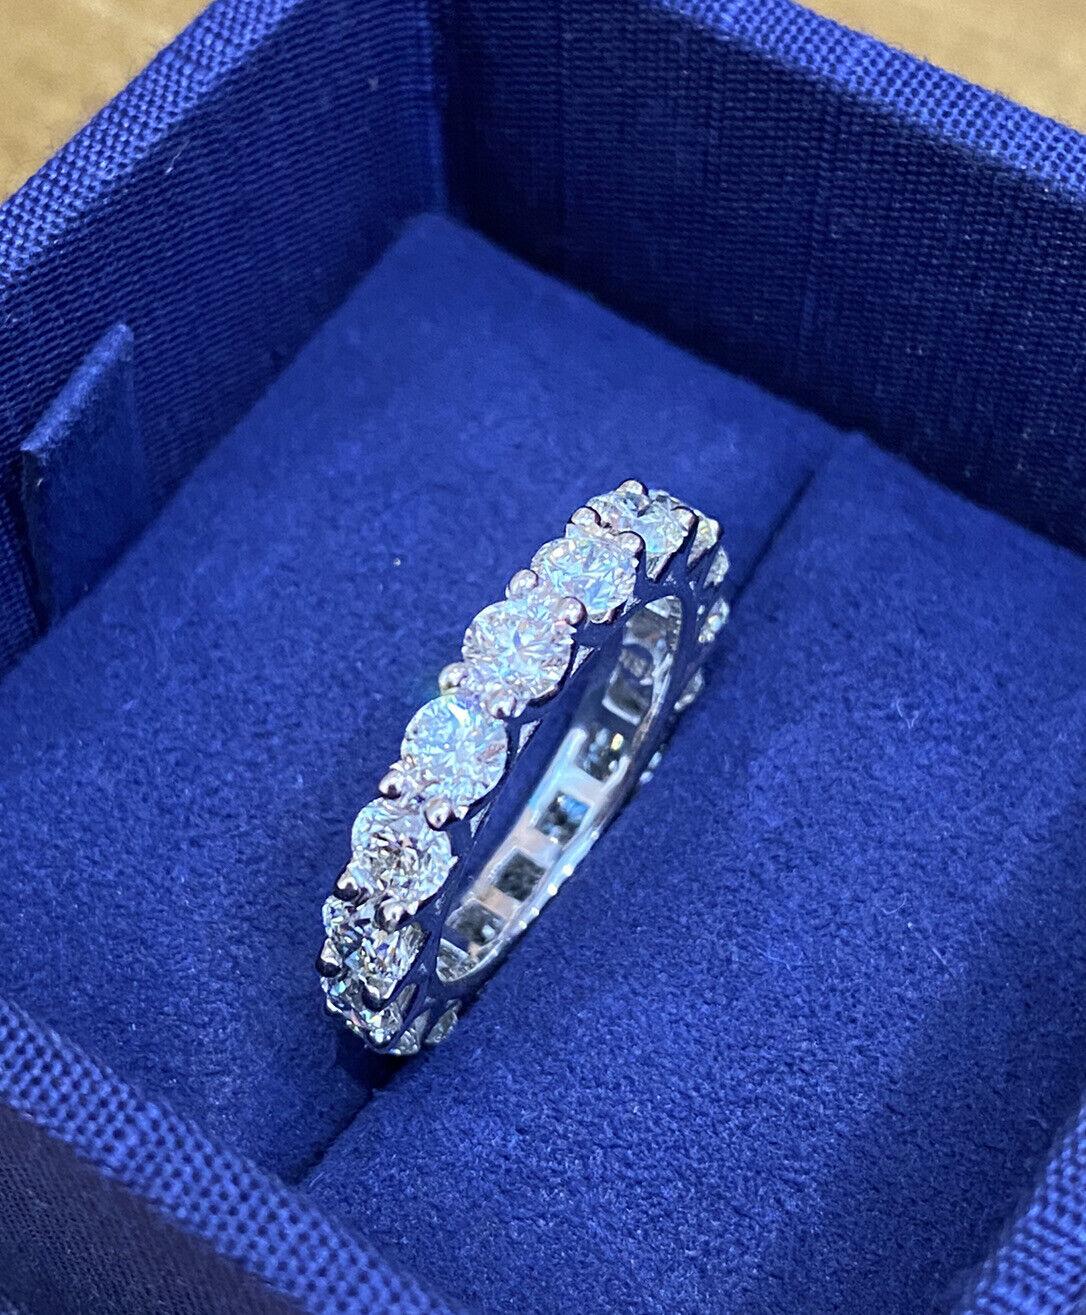 Round Diamond Eternity Band Ring 4.25 Carat Total Weight in 18k White Gold

Diamond Eternity Ring features 17 Round Brilliant cut Diamonds, averaging 0.25 carat each, individually prong set in a high polished 18k white gold setting.

Total diamond